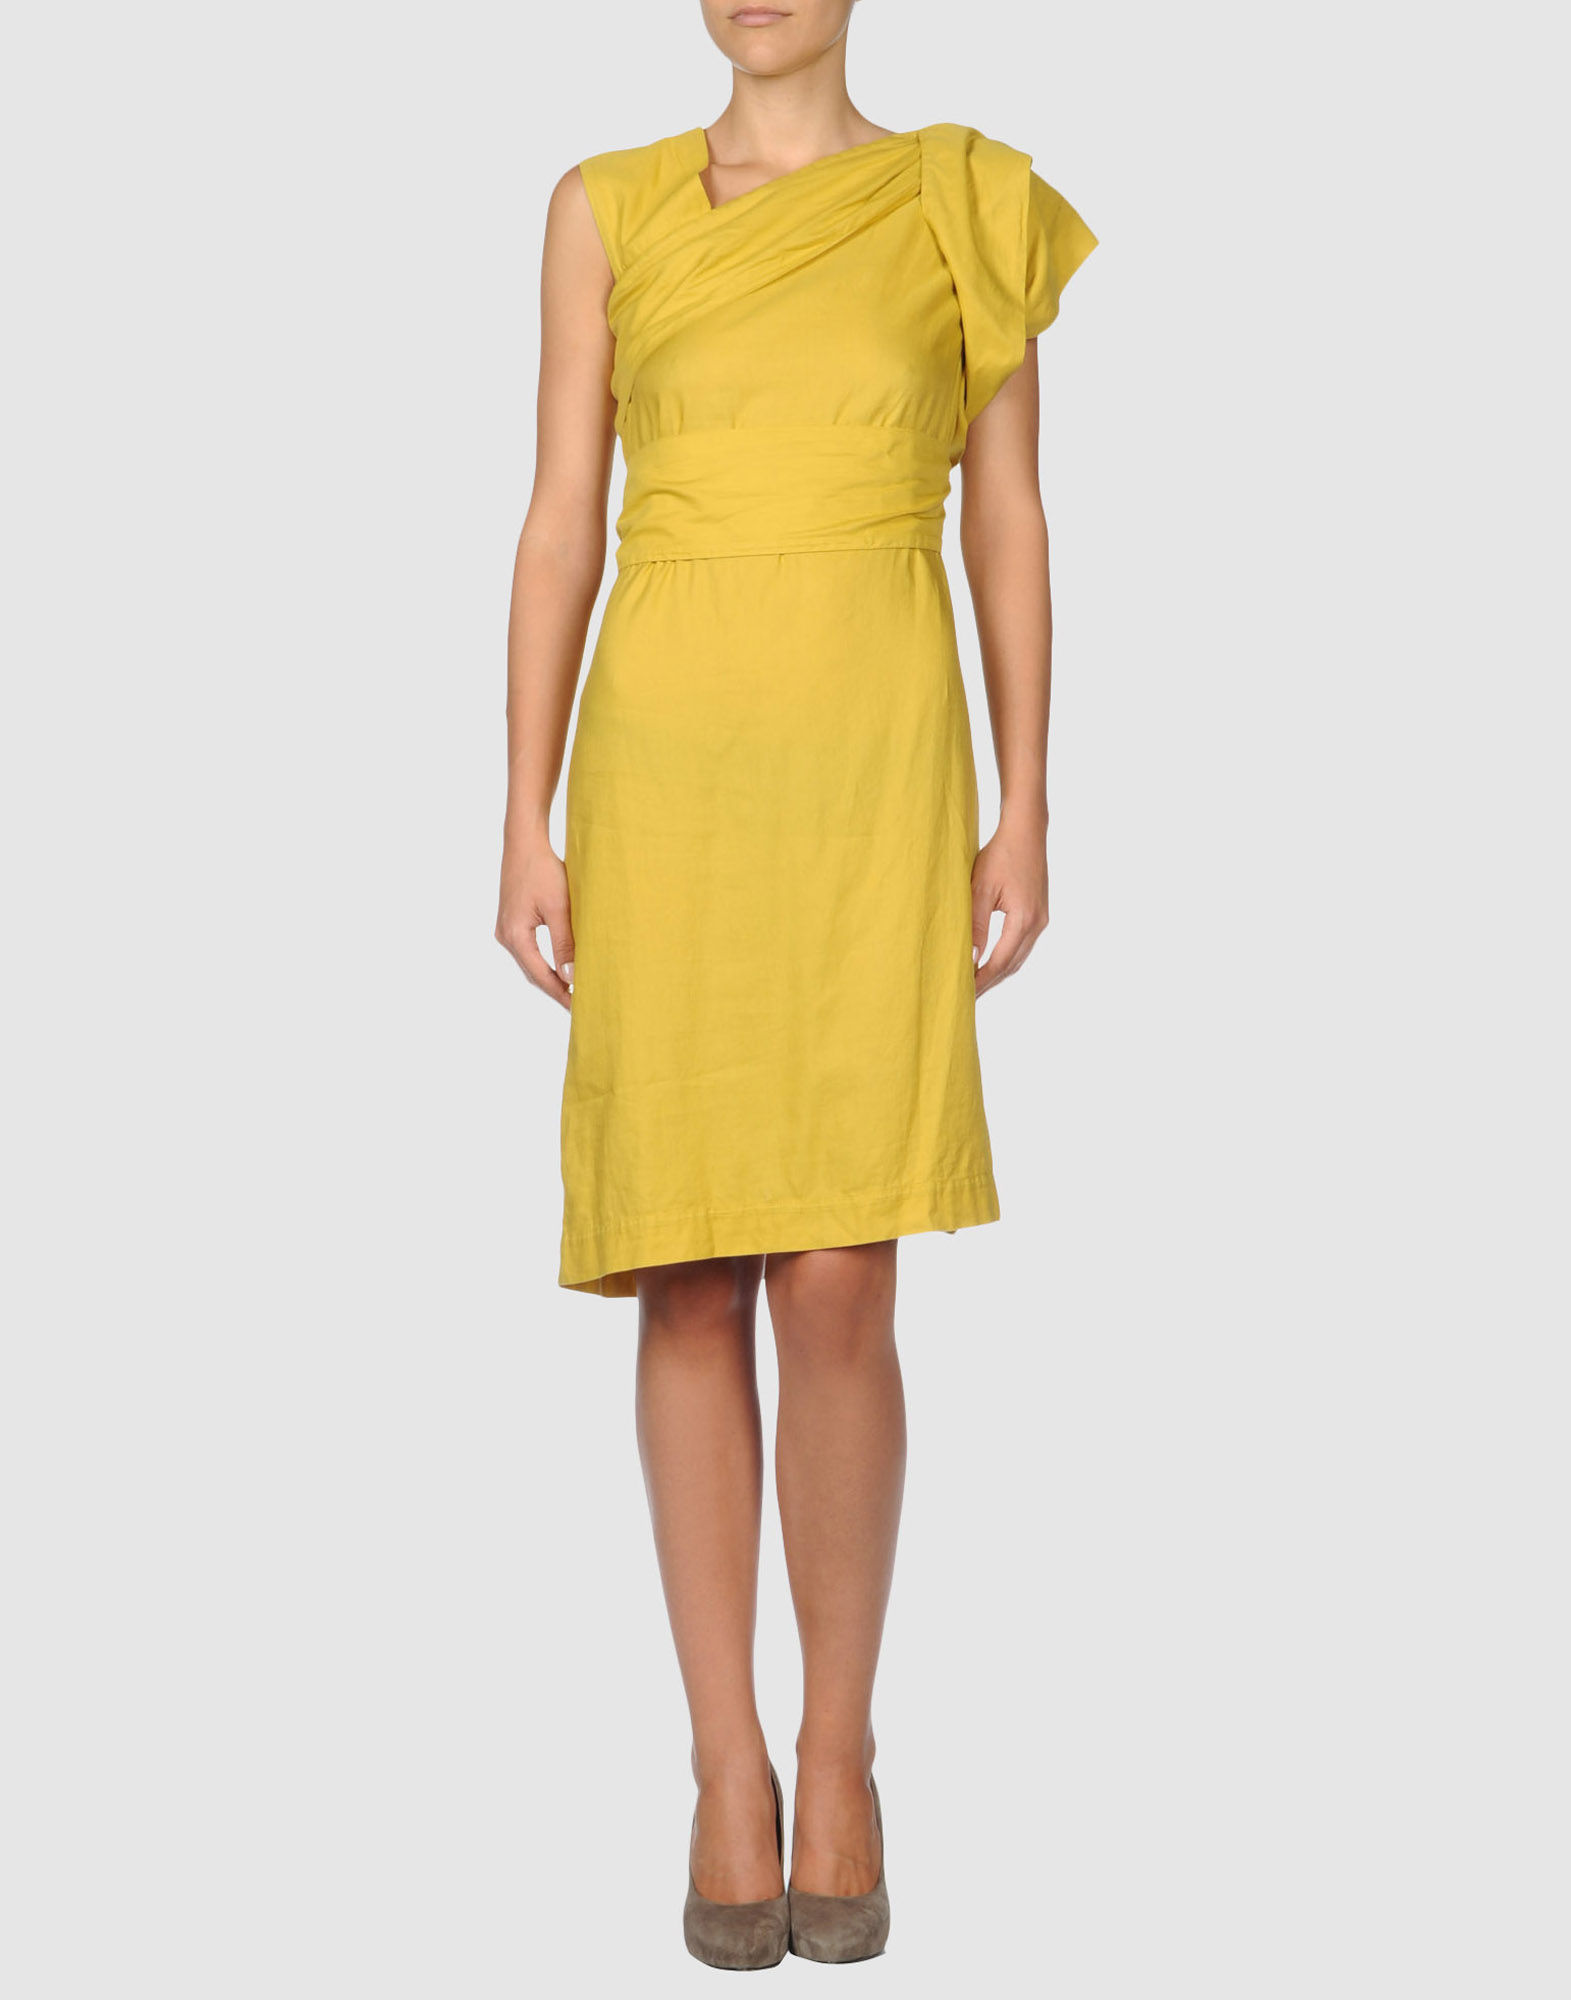 Vivienne Westwood Anglomania Short Dress in Yellow | Lyst